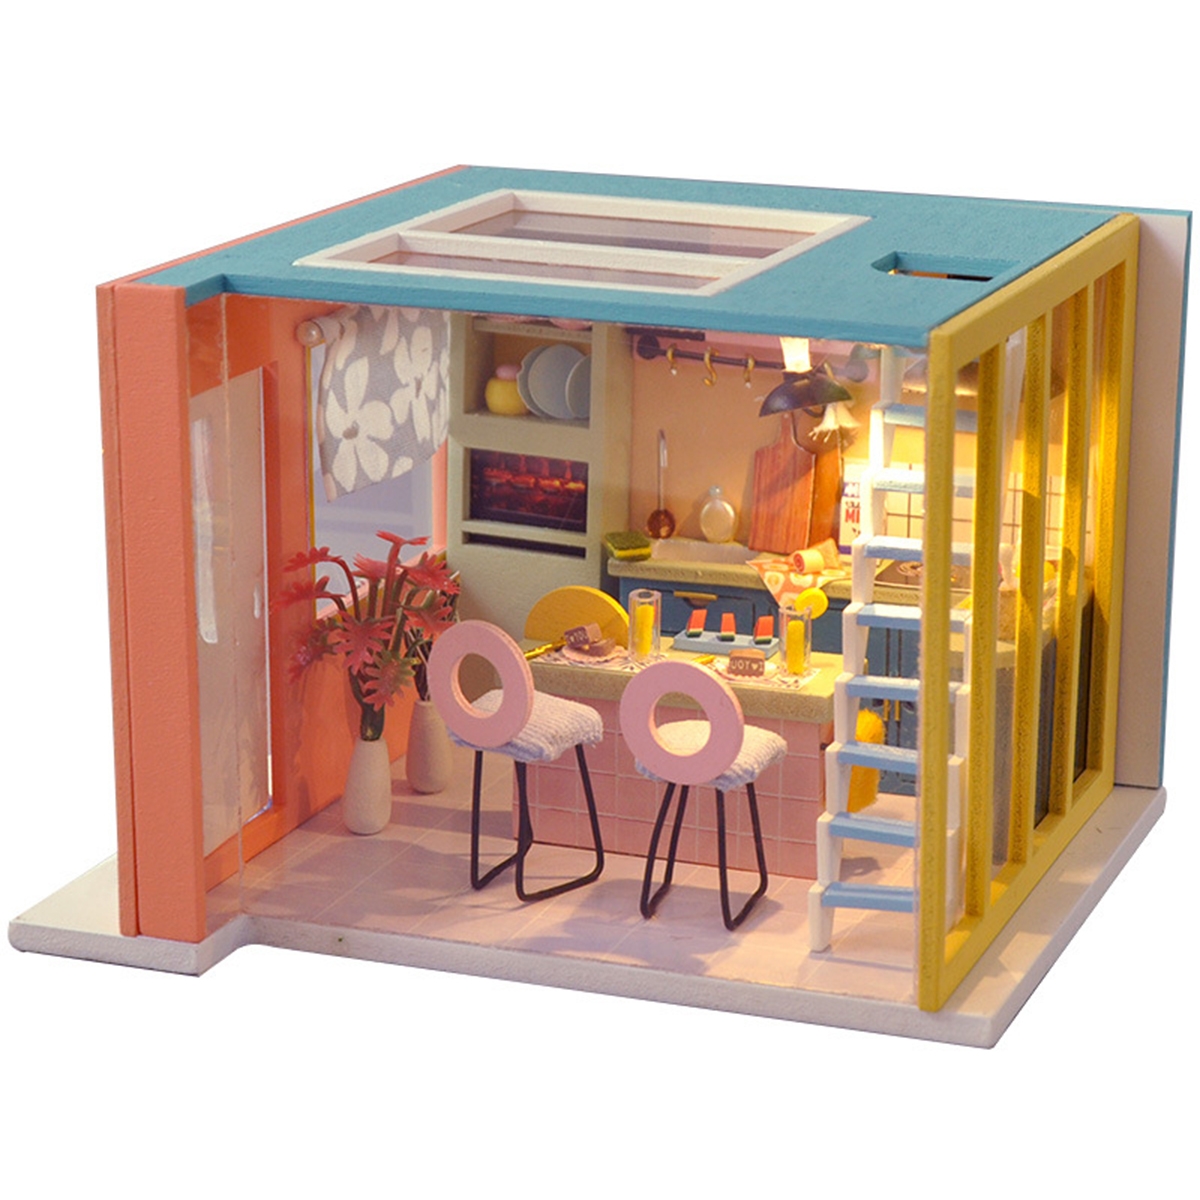 Wooden Kitchen DIY Handmade Assemble Doll House Miniature Furniture Kit Education Toy with LED Light for Kids Gift Collection